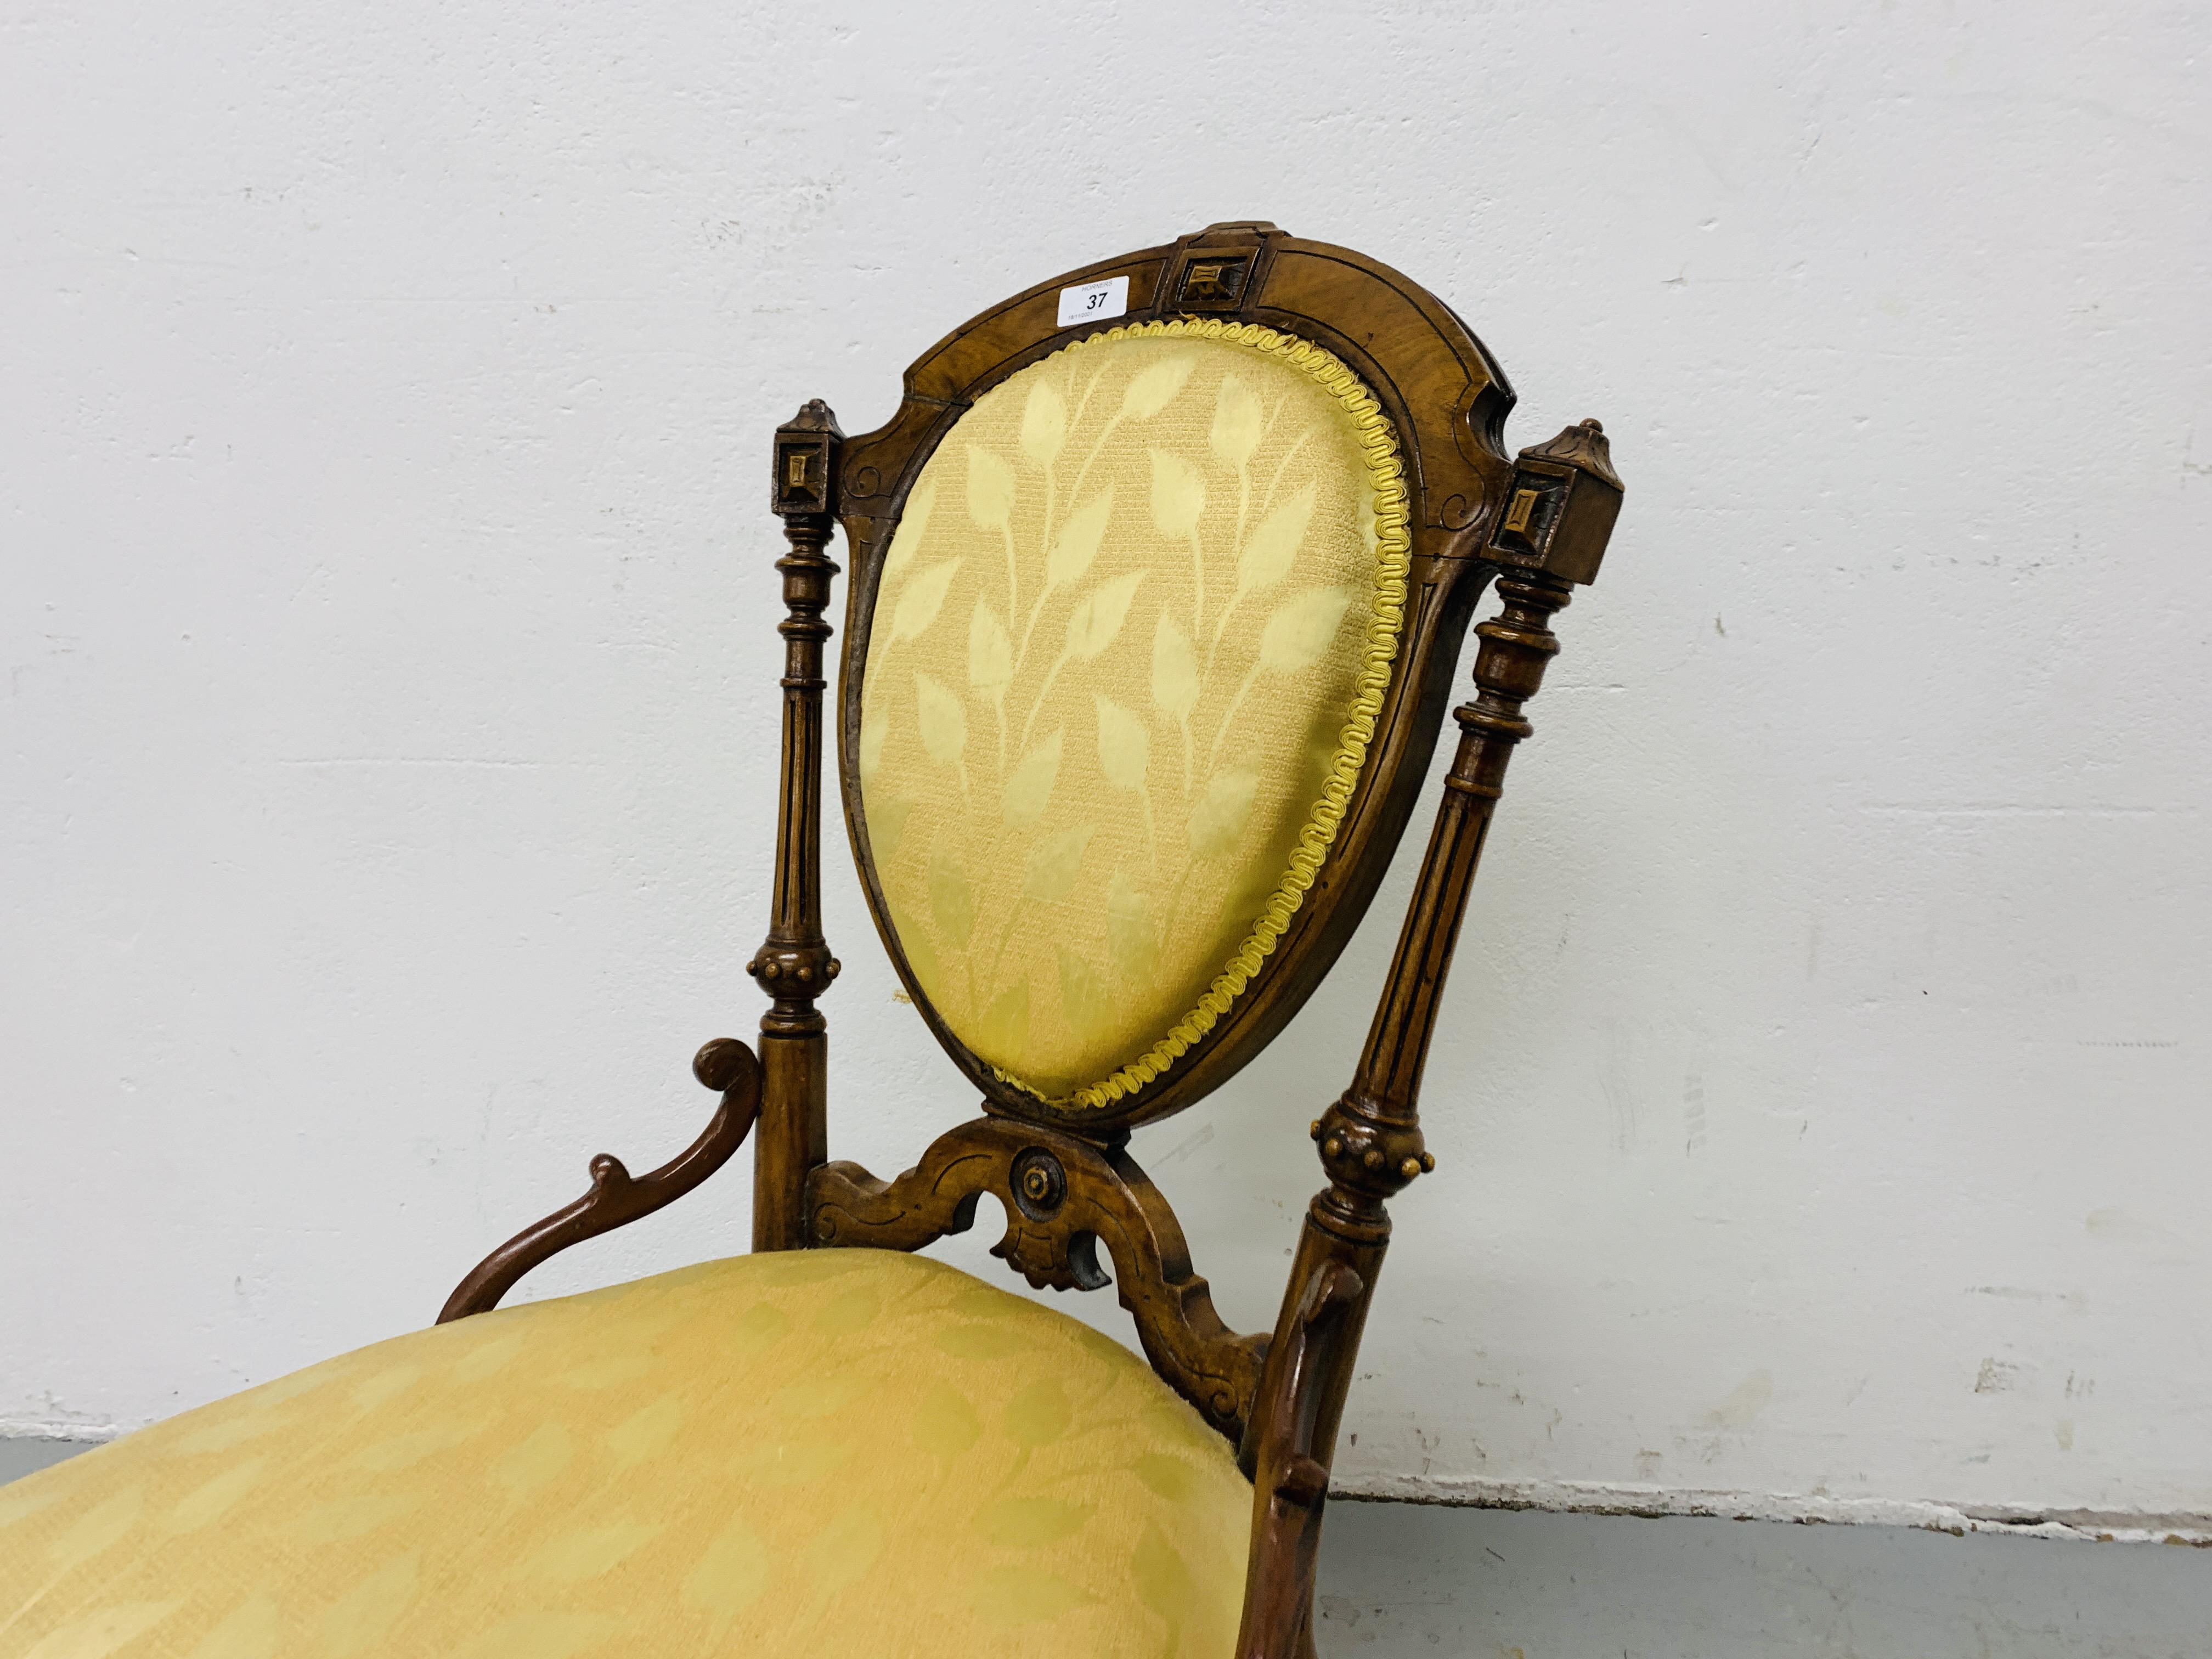 VICTORIAN ORNATE WALNUT NURSING CHAIR, WITH GOLD UPHOLSTERED SEAT AND BACK - H 85CM. - Image 2 of 9